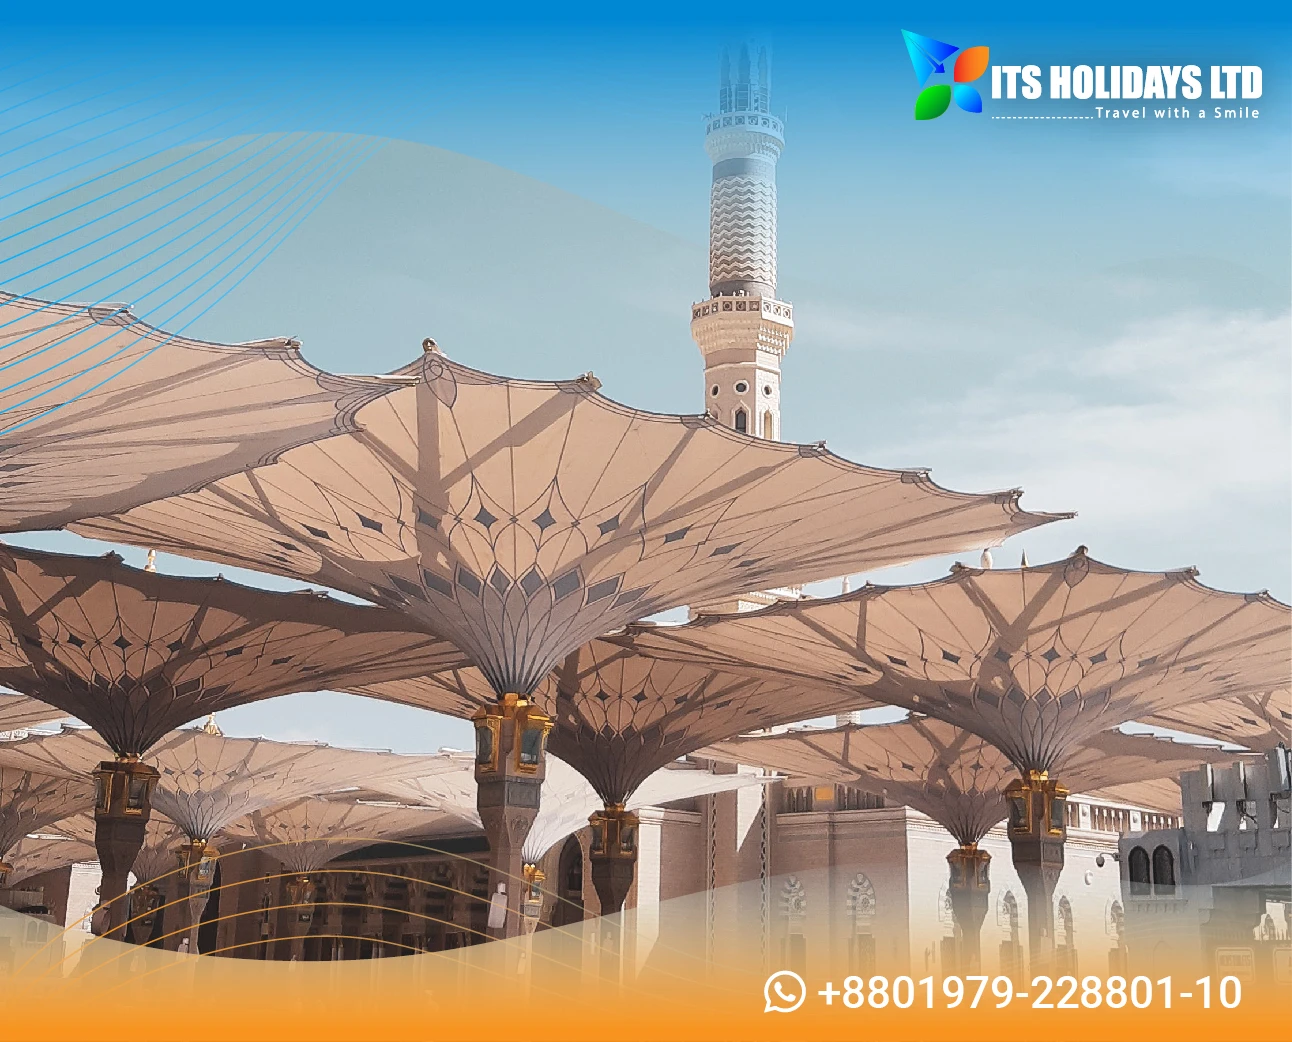 Exclusive Umrah Package - 10 Days